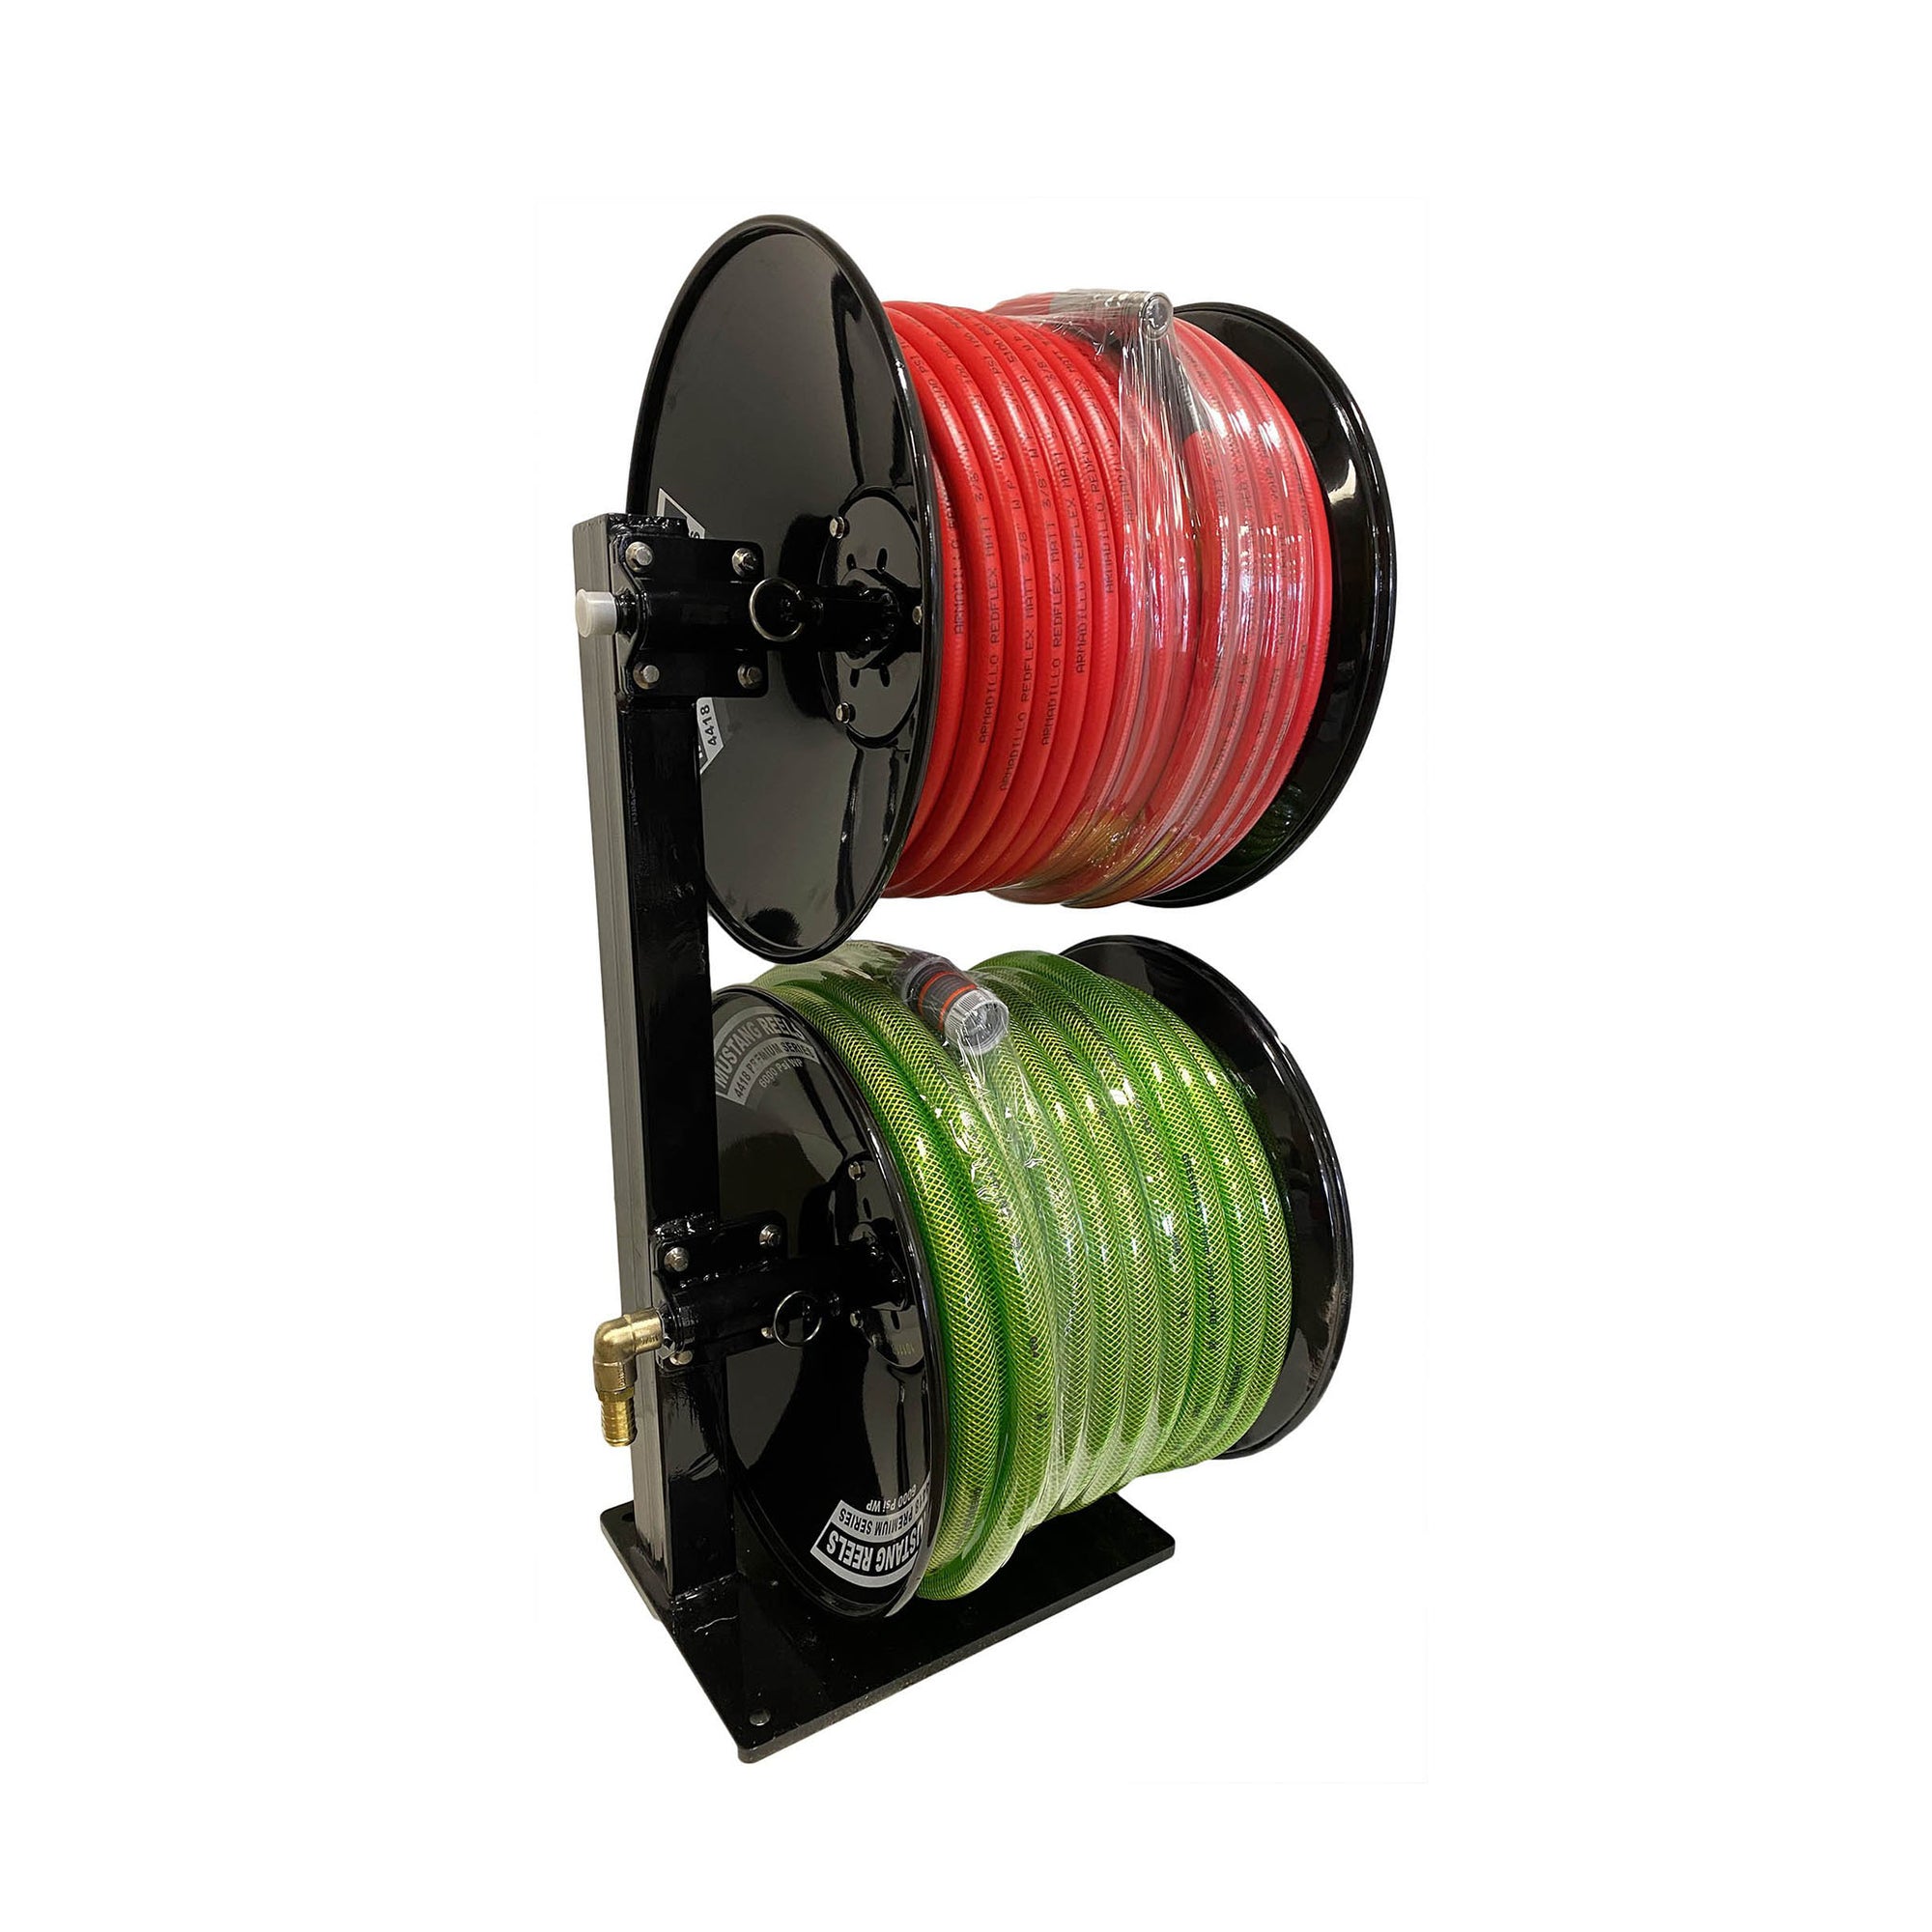 Unique Double Stacked Hose Reel with Hoses 1/4"